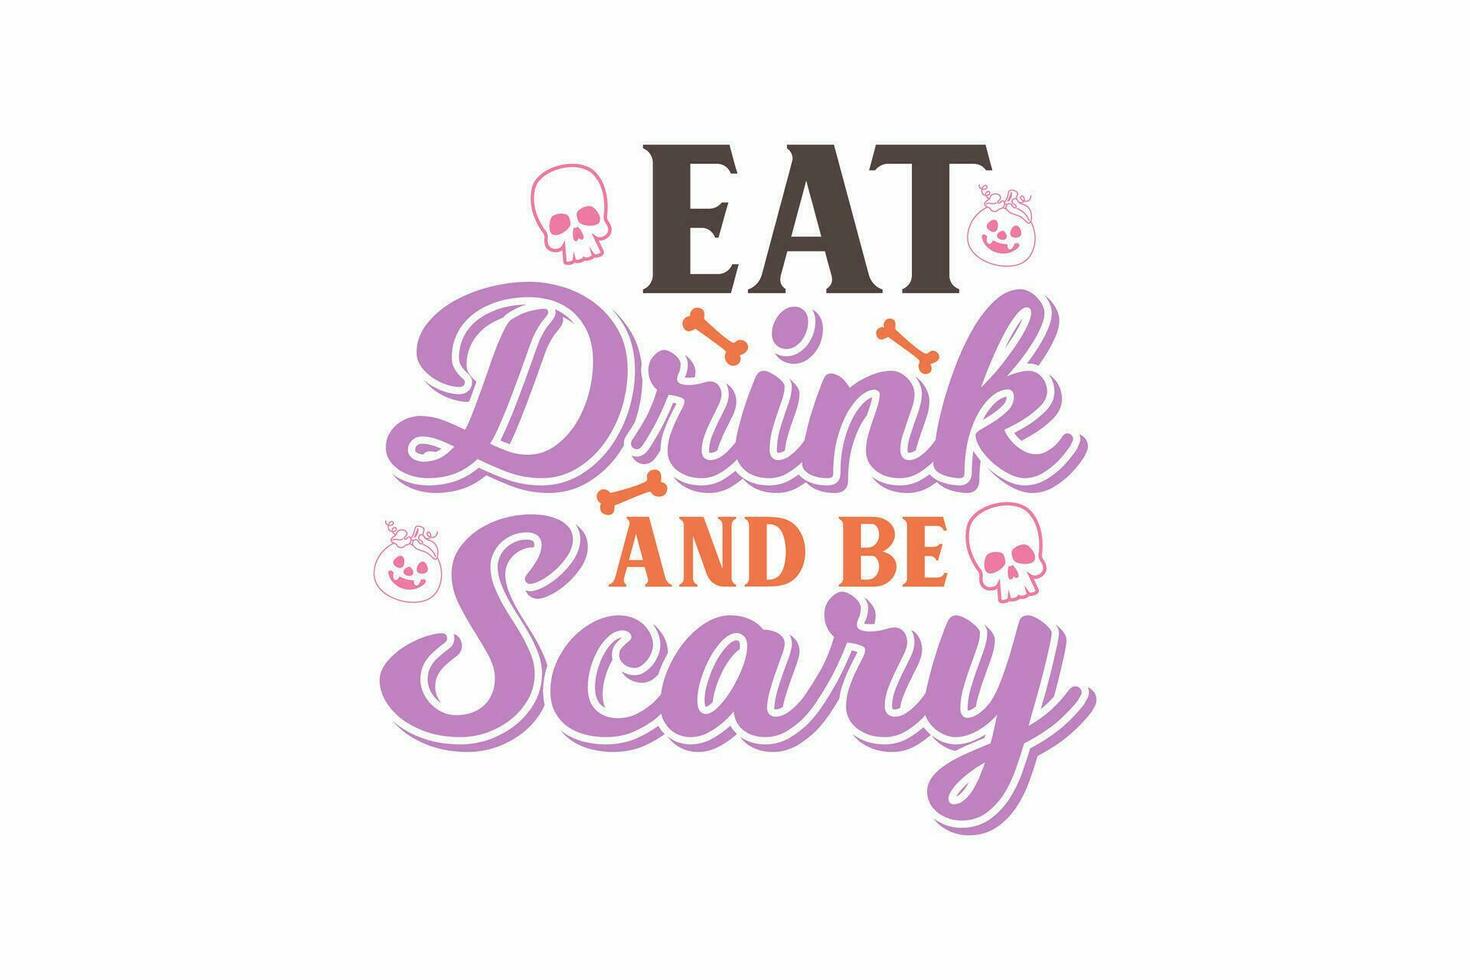 Eat drink and be Scary Halloween Typography T shirt design vector